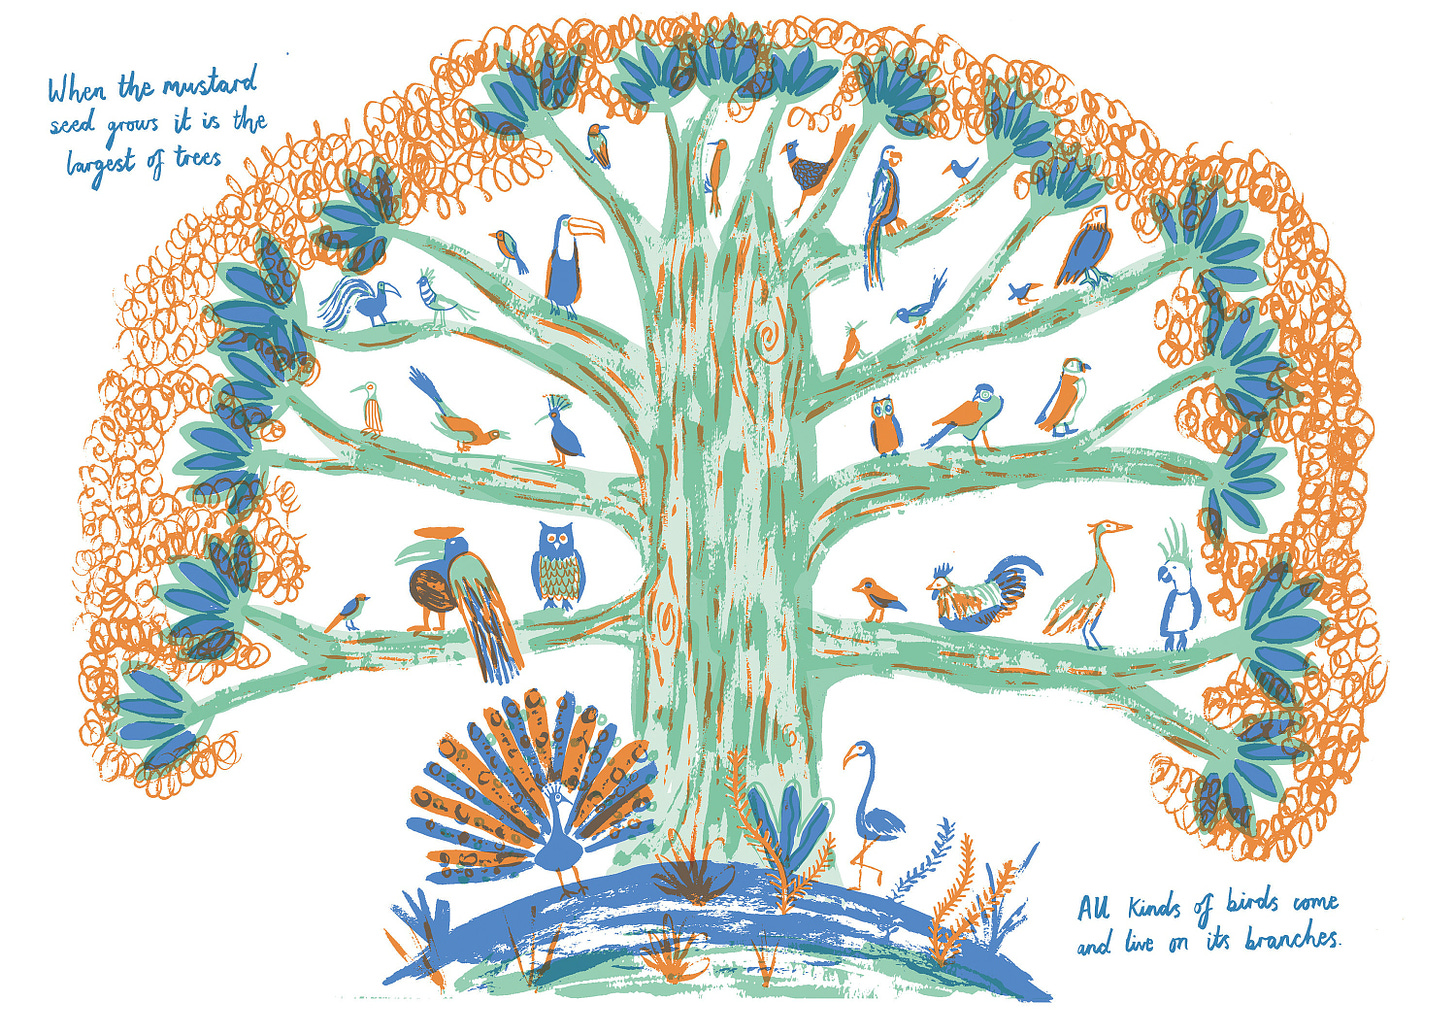 An illustration of the many birds of the air nesting in the mustard shrub